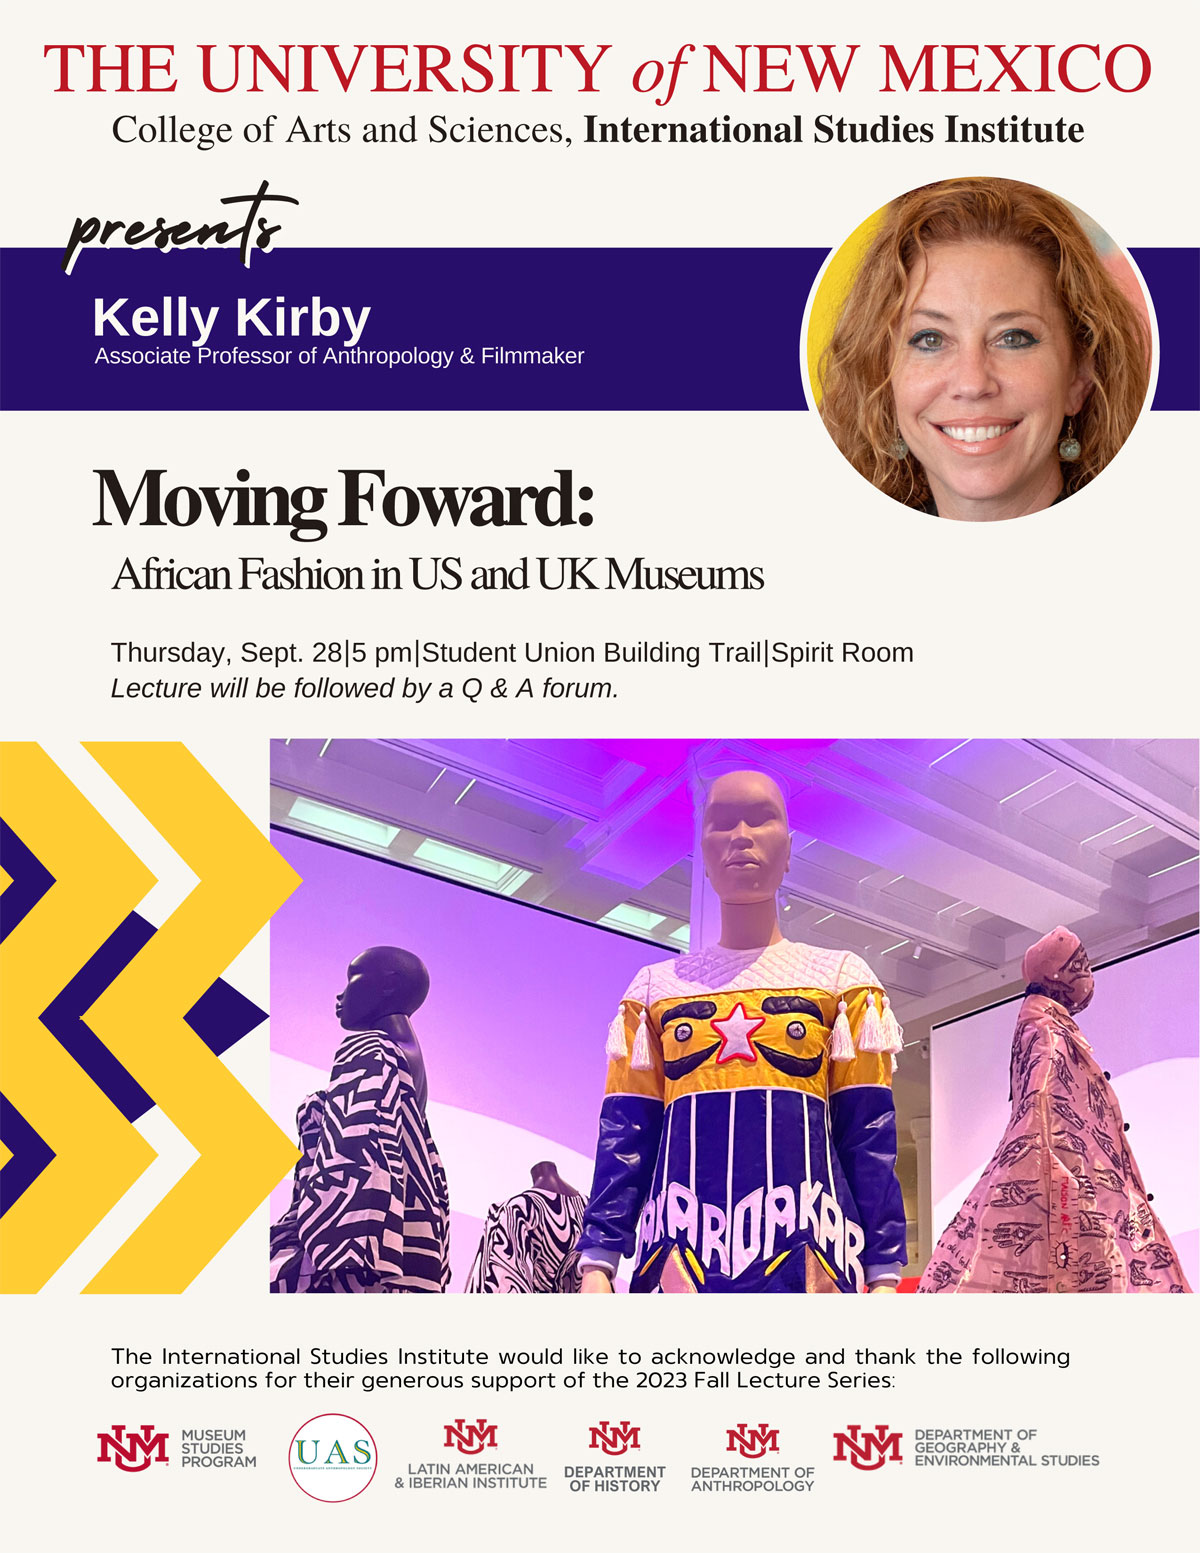 Moving Forward: African Fashion in US and UK Museums